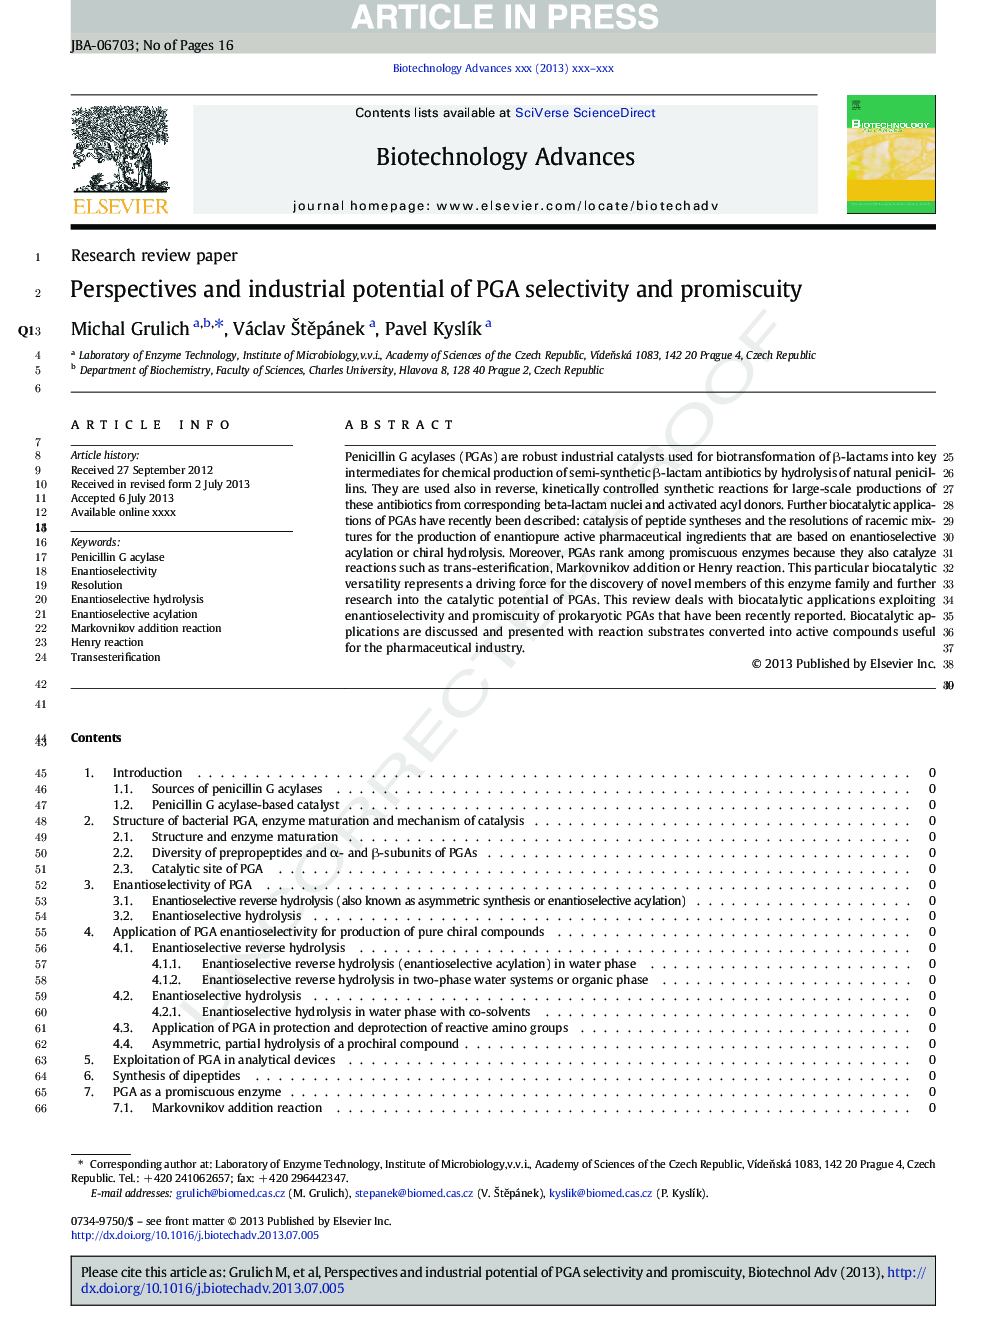 Perspectives and industrial potential of PGA selectivity and promiscuity